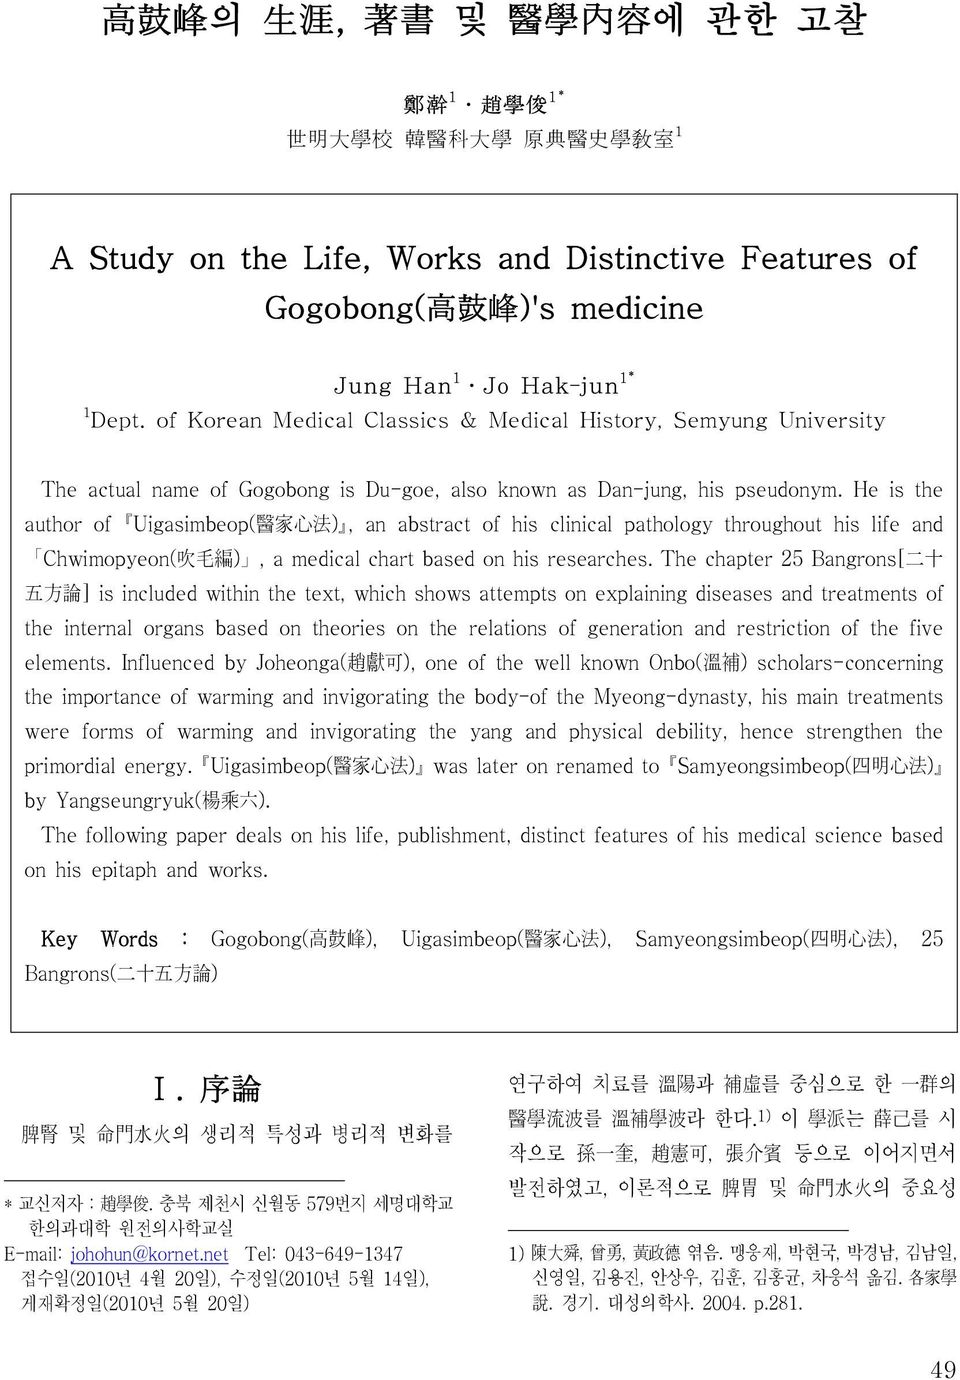 He is the author of Uigasimbeop(醫家心法), an abstract of his clinical pathology throughout his life and Chwimopyeon(吹毛編), a medical chart based on his researches.